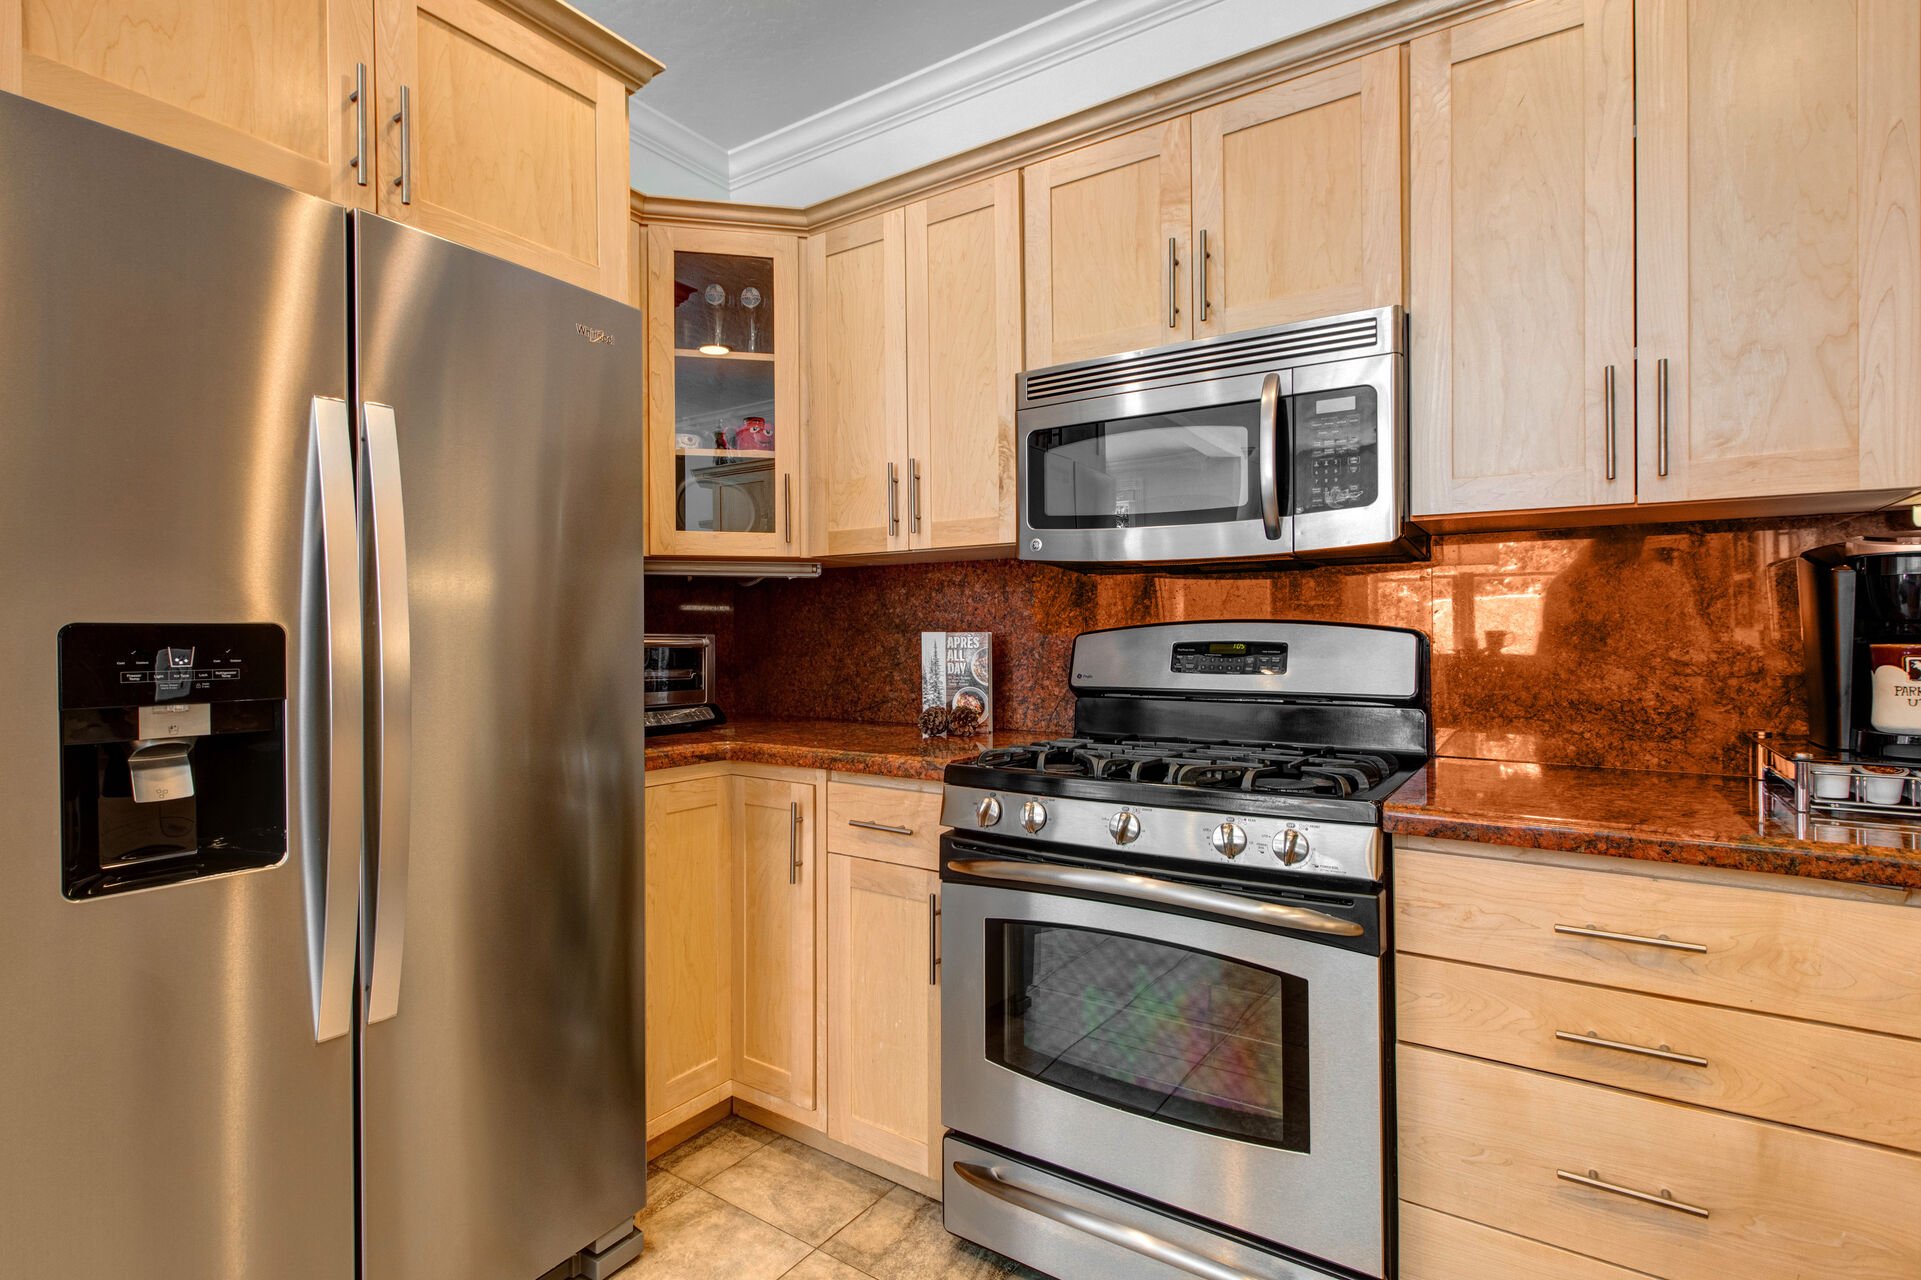 Fully Equipped Kitchen with gorgeous stone countertops, stainless steel appliances, ice maker, and bar seating for four